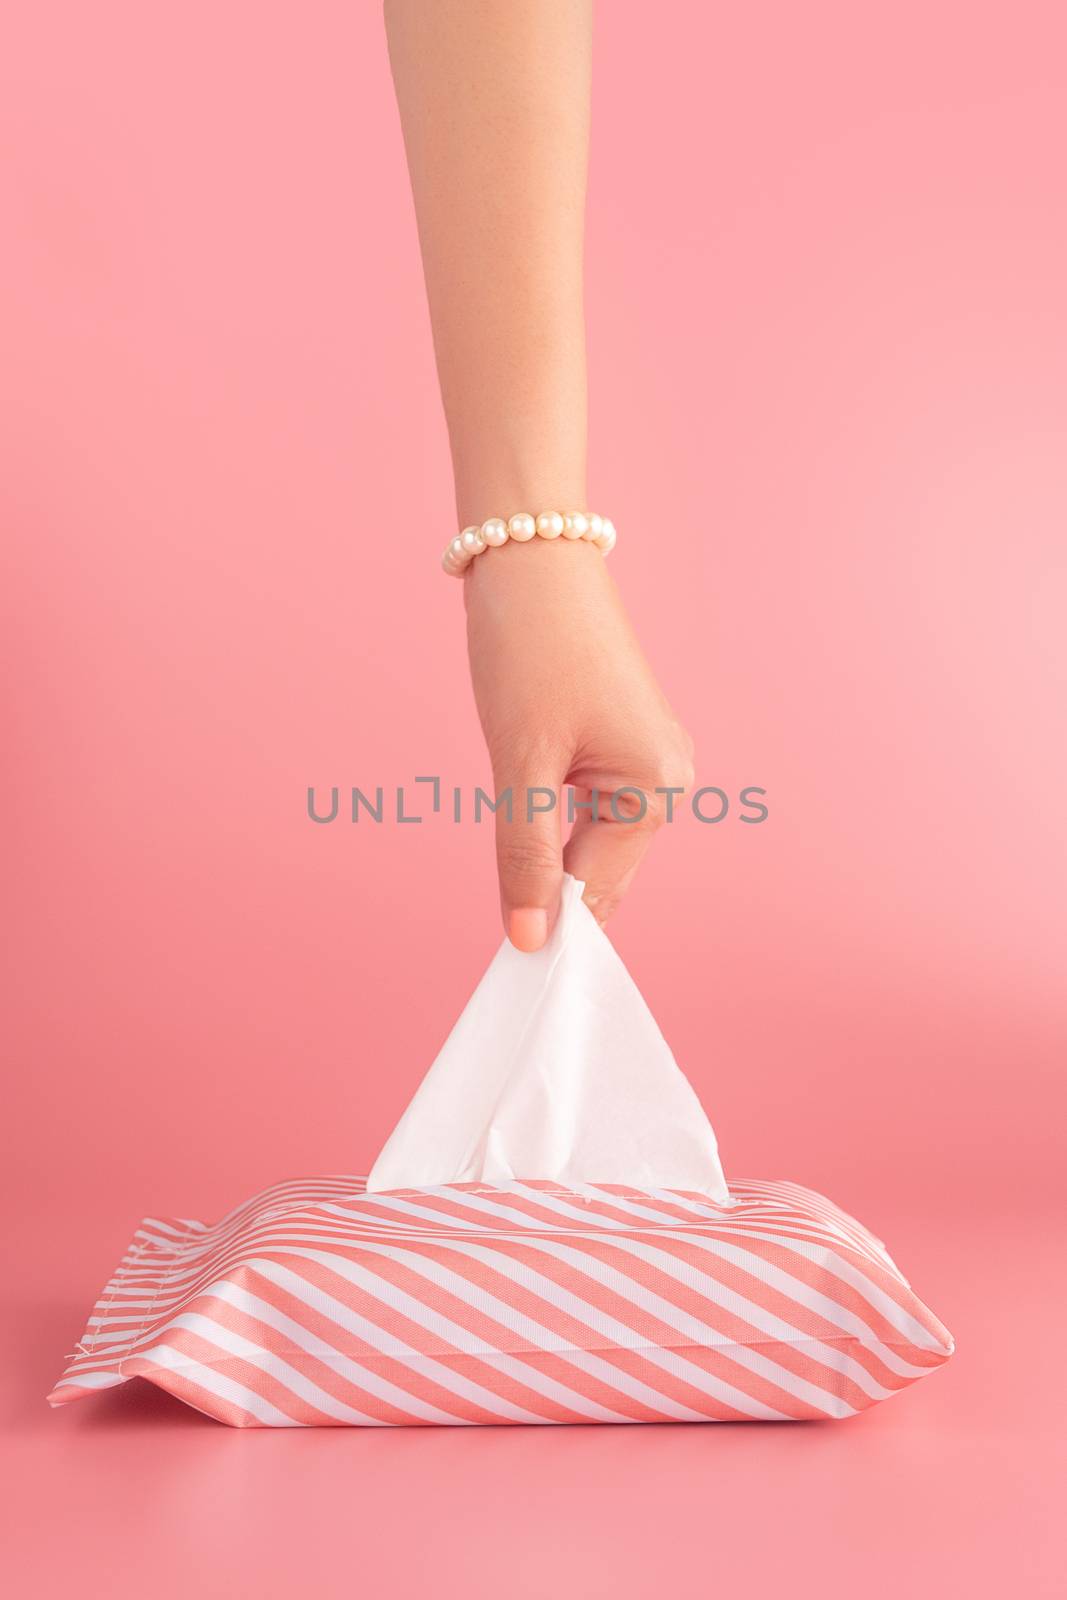 woman pull the tissue paper out of the tissue box isolated on pink background, vertical. sanitation and hygiene facility concept